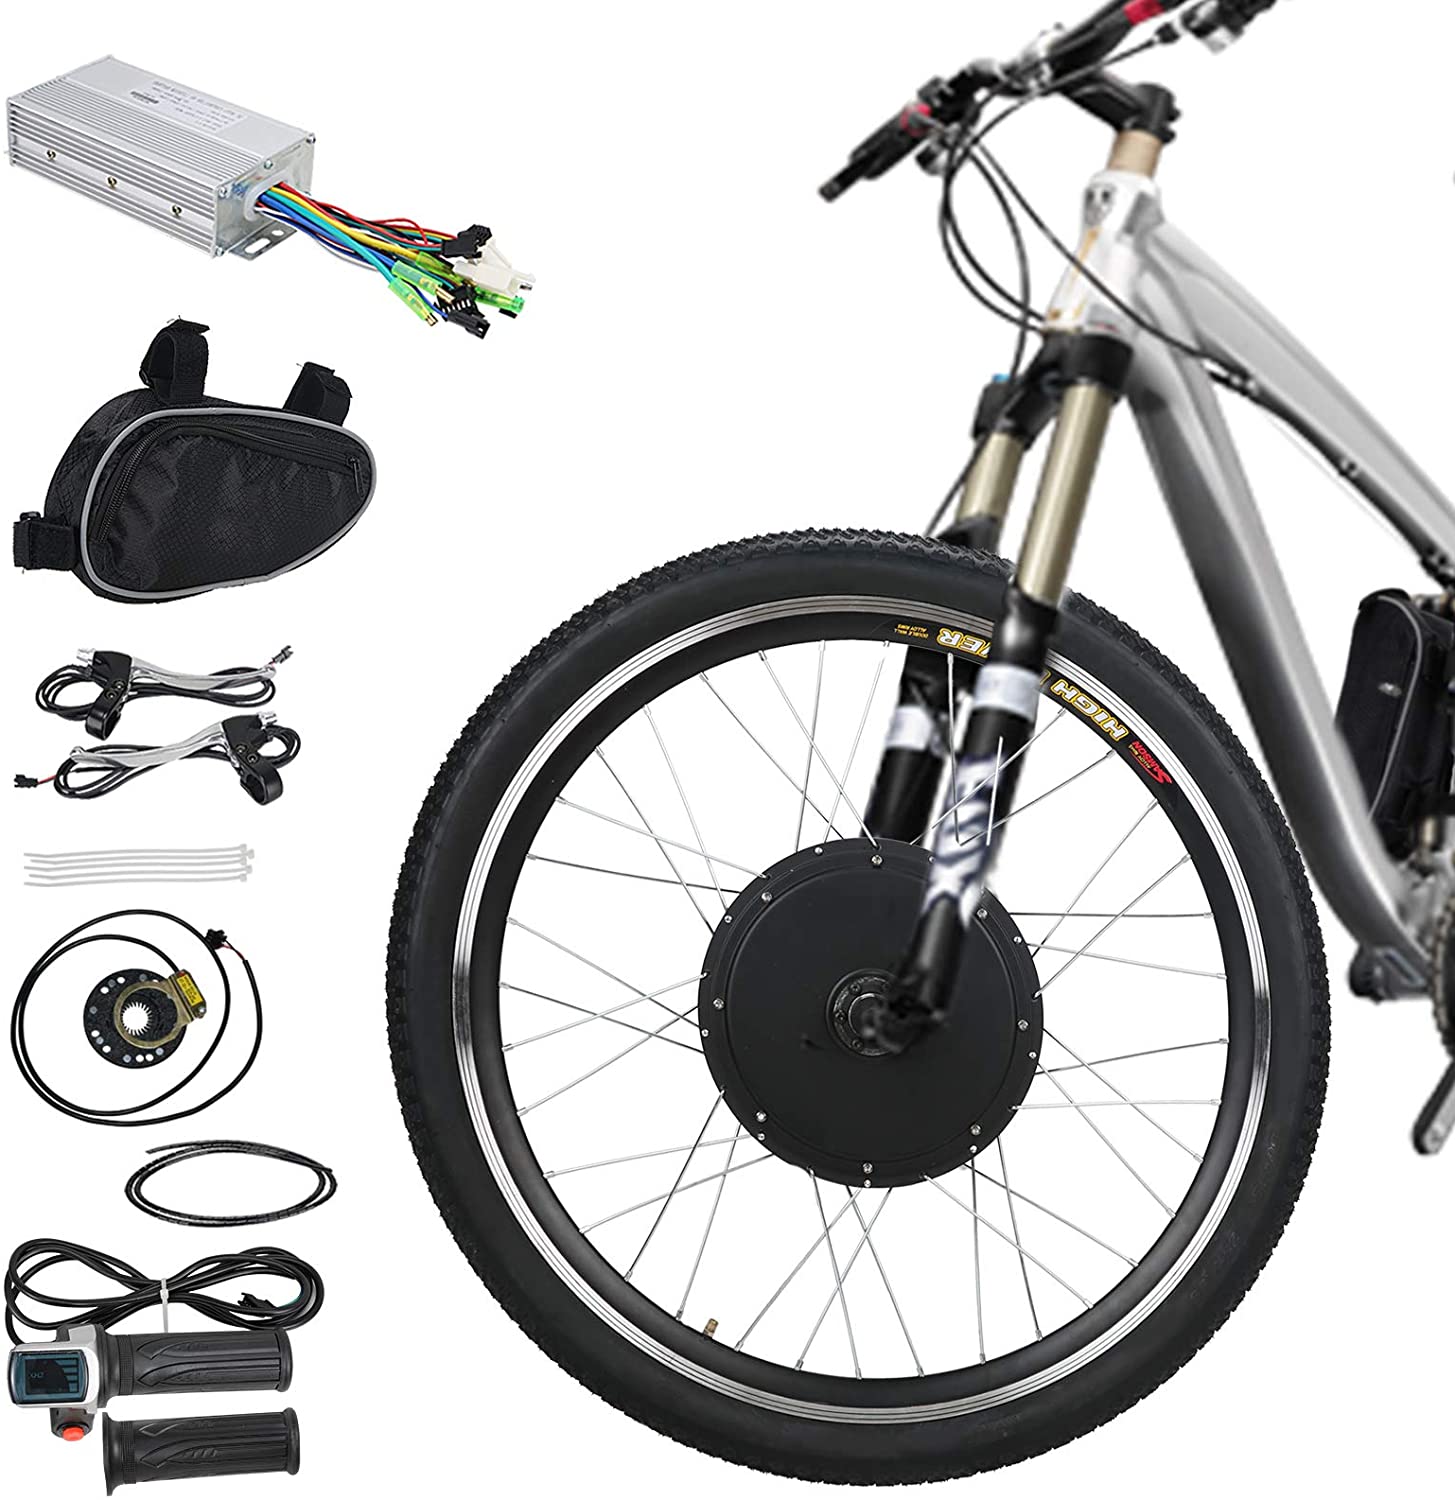 Voilamart E-Bike Conversion Kit 26" Front Wheel 36V 500W Electric Bicycle Conversion Motor Kit with Intelligent Controller and PAS System for Road Bike